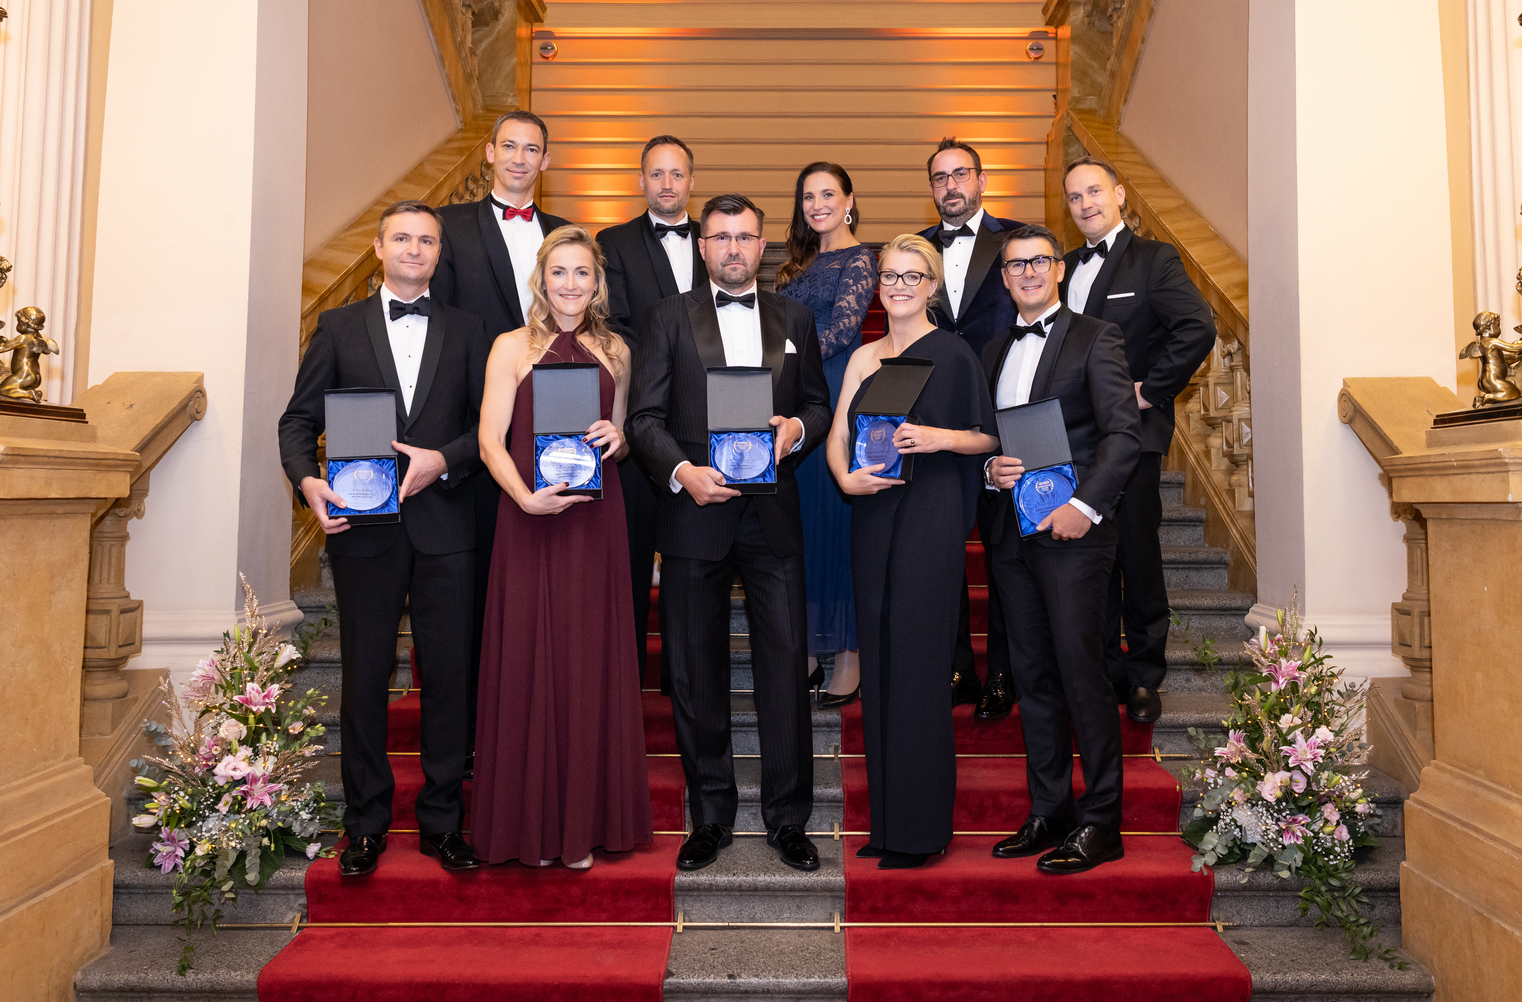 HAVEL & PARTNERS wins the Best Client Service and the Best Domestic Law Firm awards in the Law Firm of the Year ranking